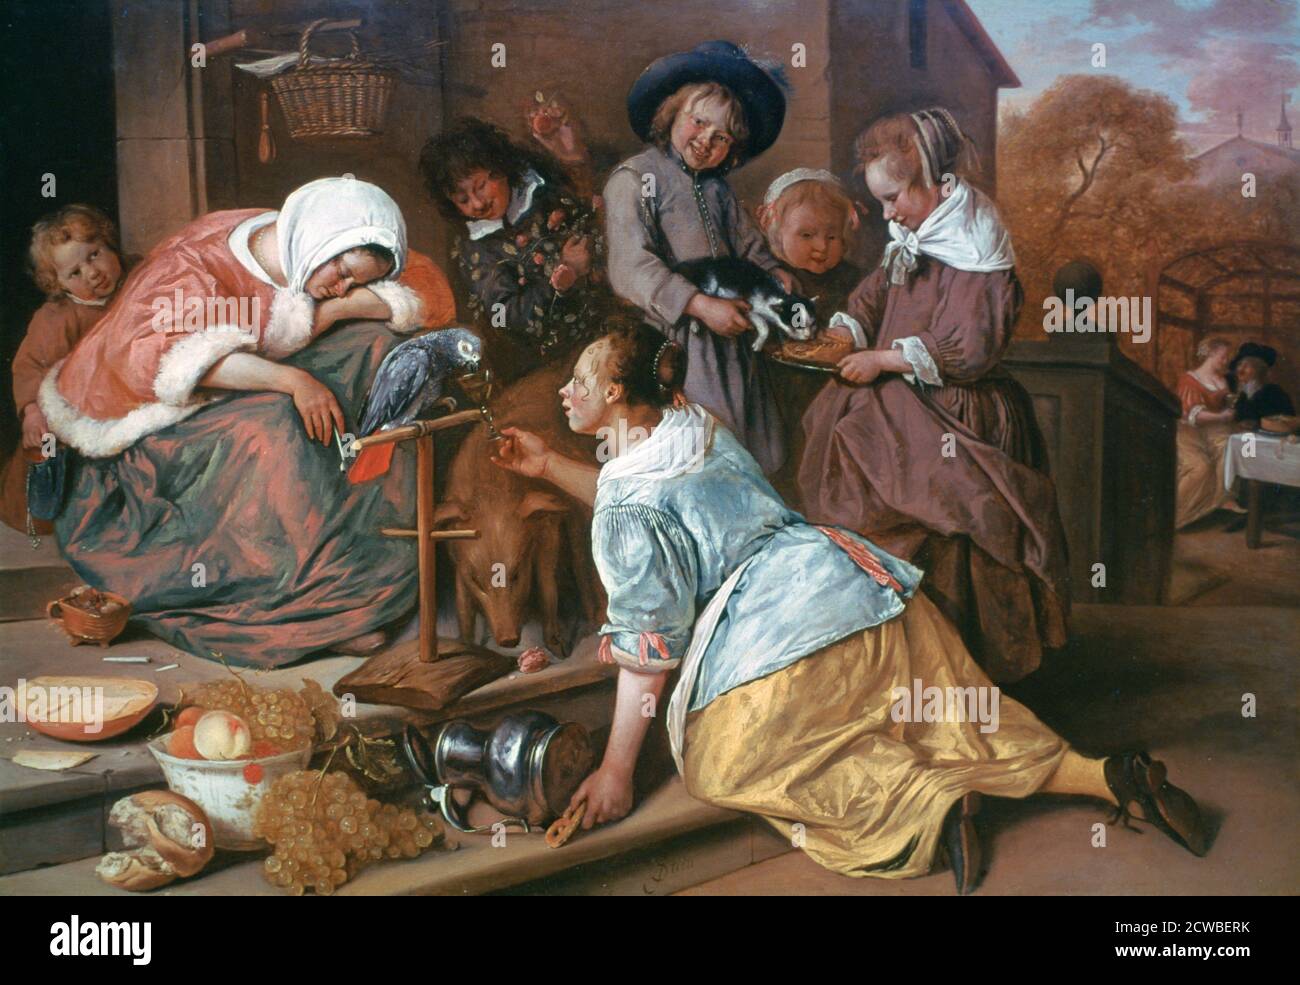 The Effects of Intemperance', 1663-1665. Artist: Jan Steen. Jan Havickszoon Steen (1626-1679) was a Dutch Golden Age painter, one of the leading genre painters of the 17th century. Stock Photo